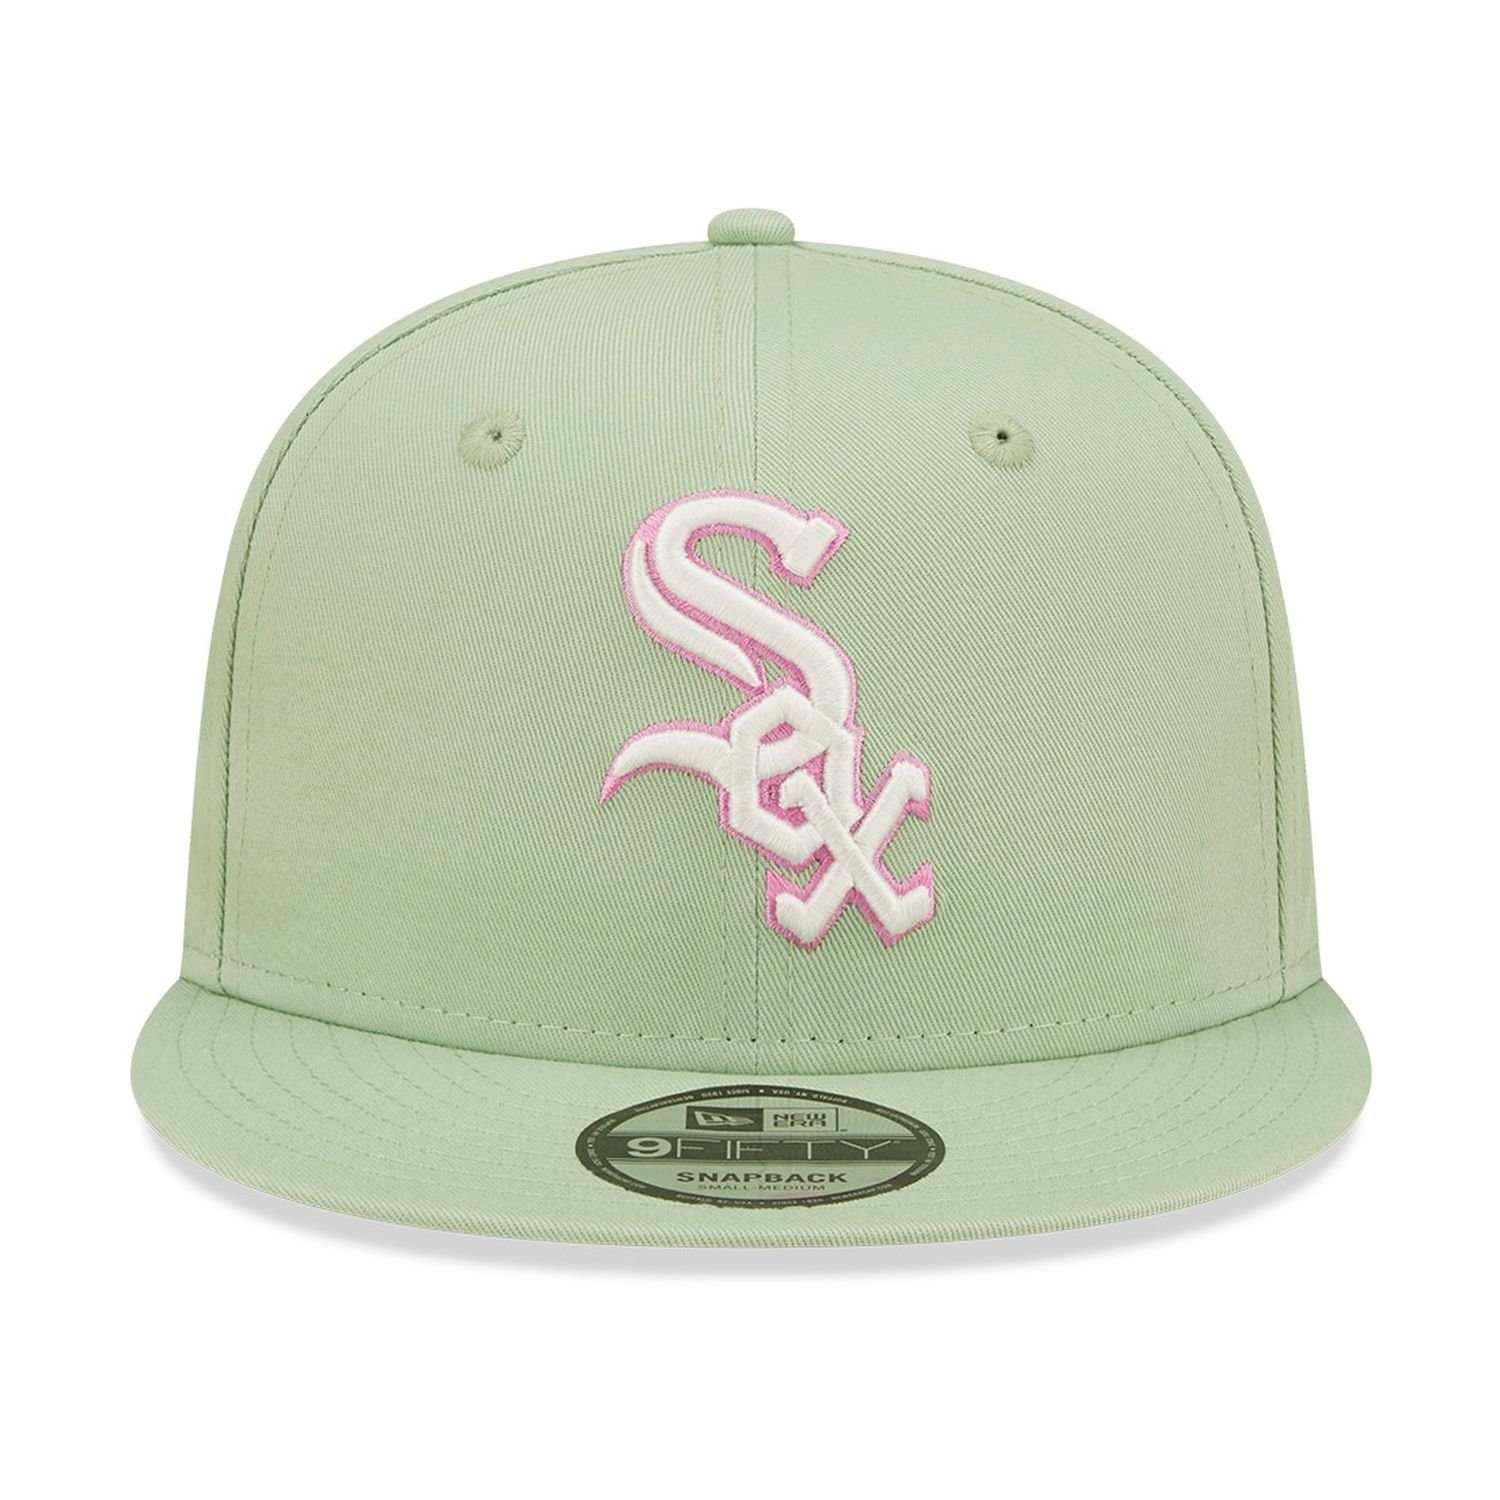 New Era Chicago 9Fifty White Cap PATCH Sox Snapback